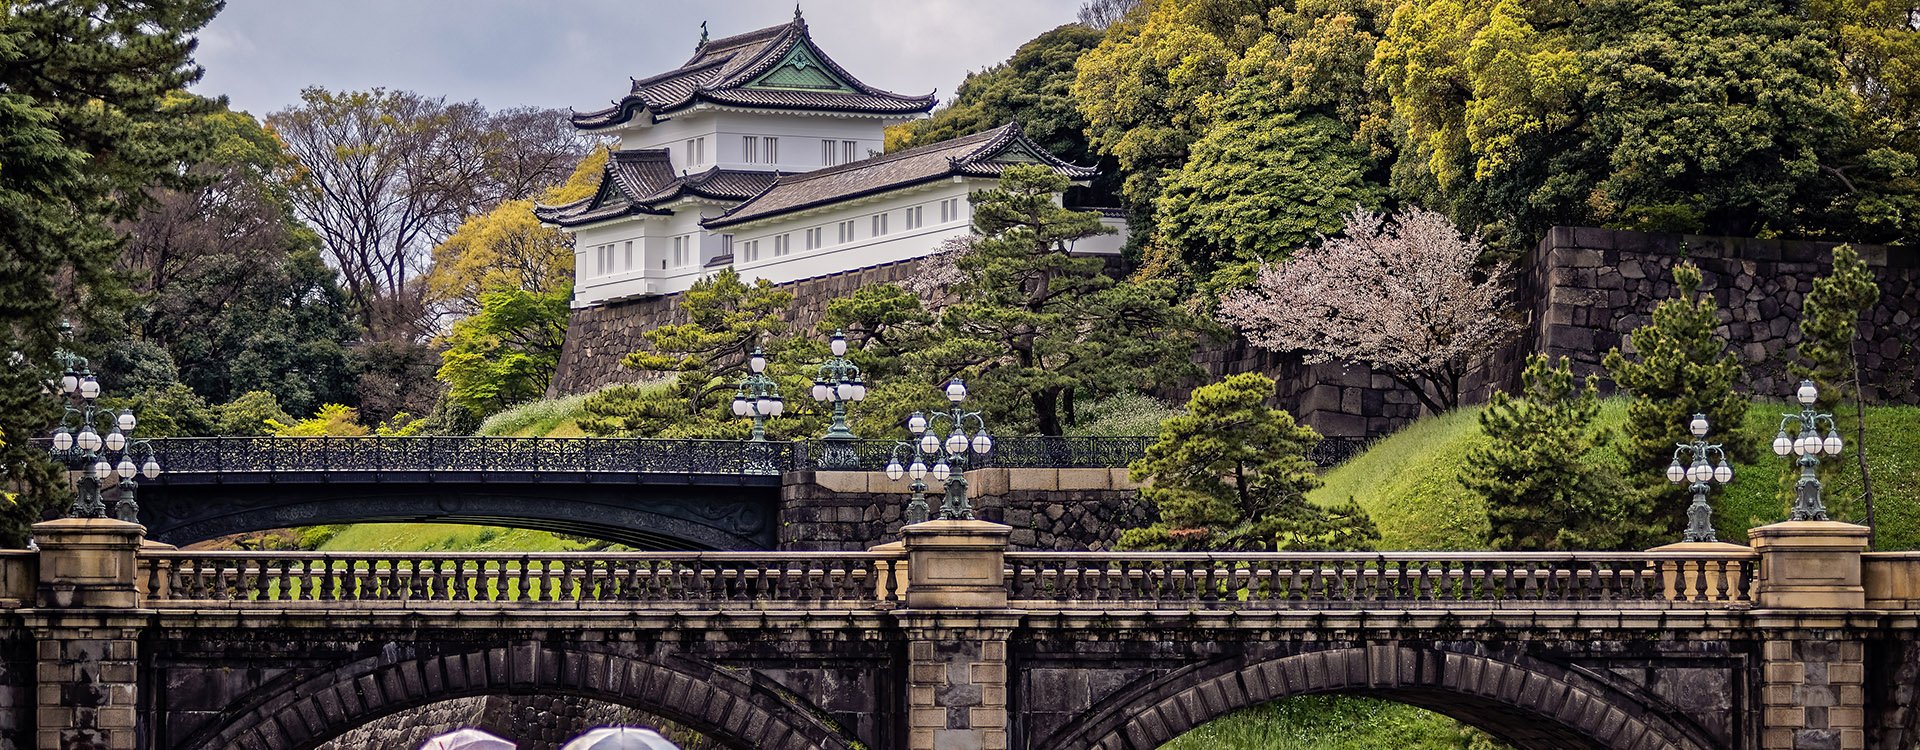 Two young ladies with umbrellas admire the striking Imperial Palace in Tokyo, Japan